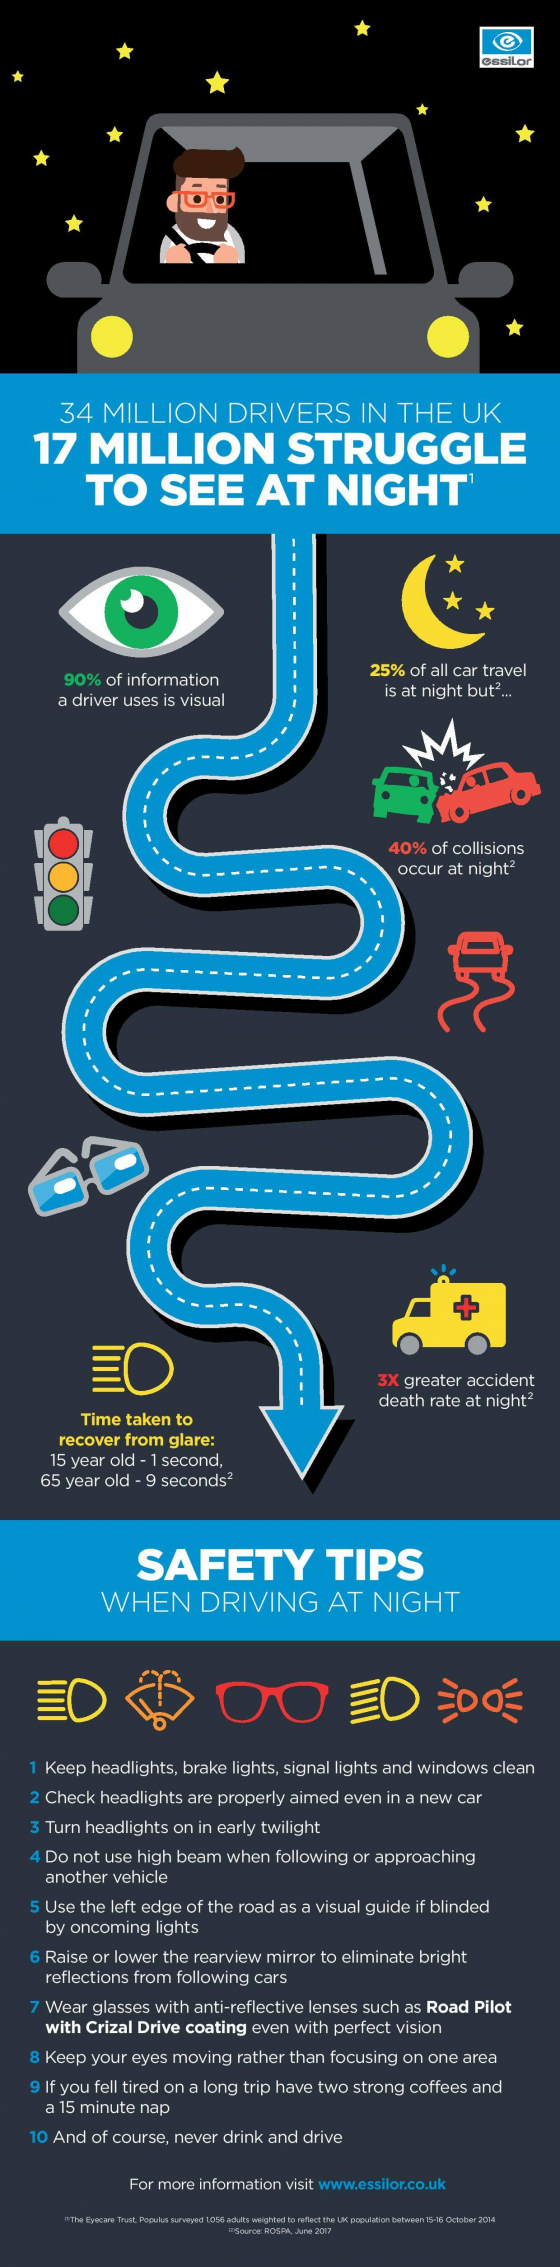 infographic on the facts about night driving through to ten safety tips which you can take.